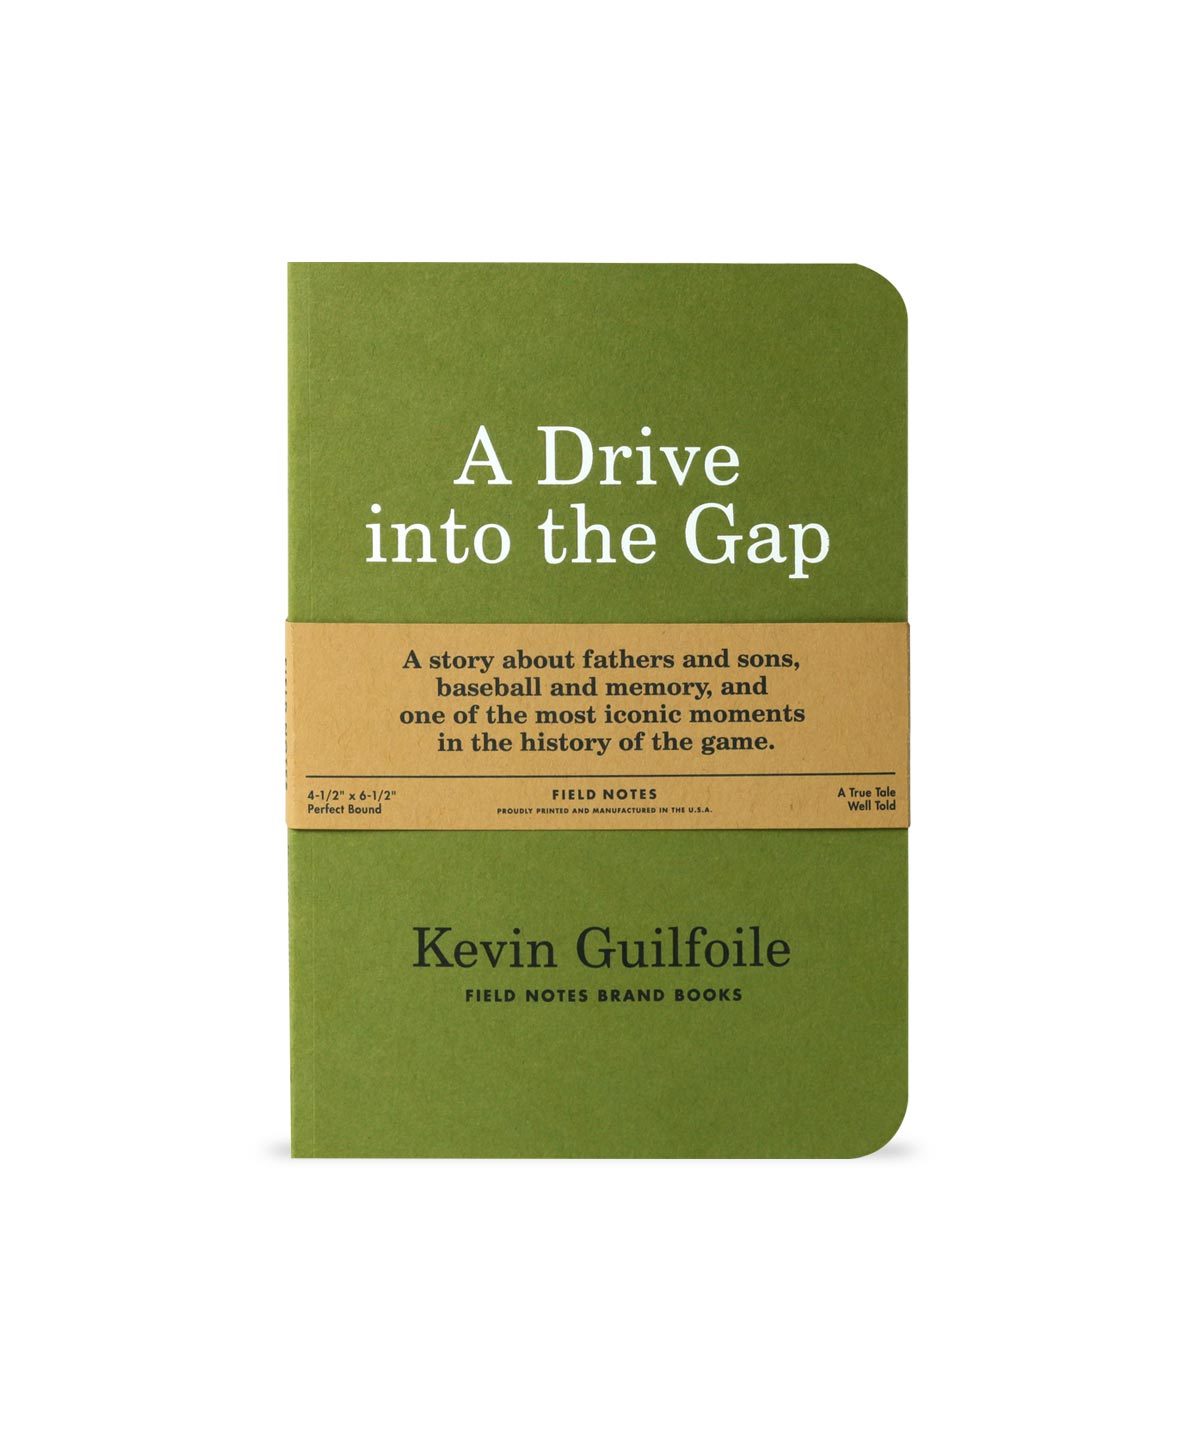 A Drive into the Gap - A Field Notes book